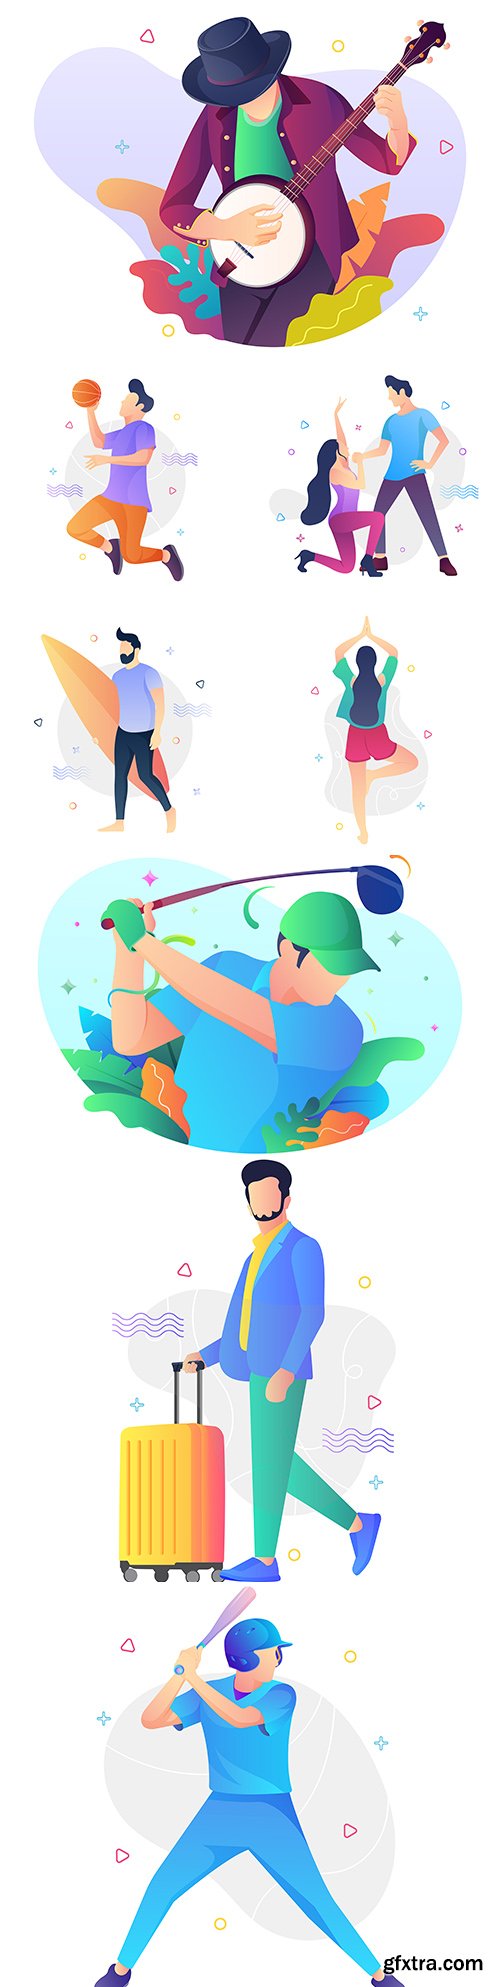 People and different lifestyles concept of illustration
